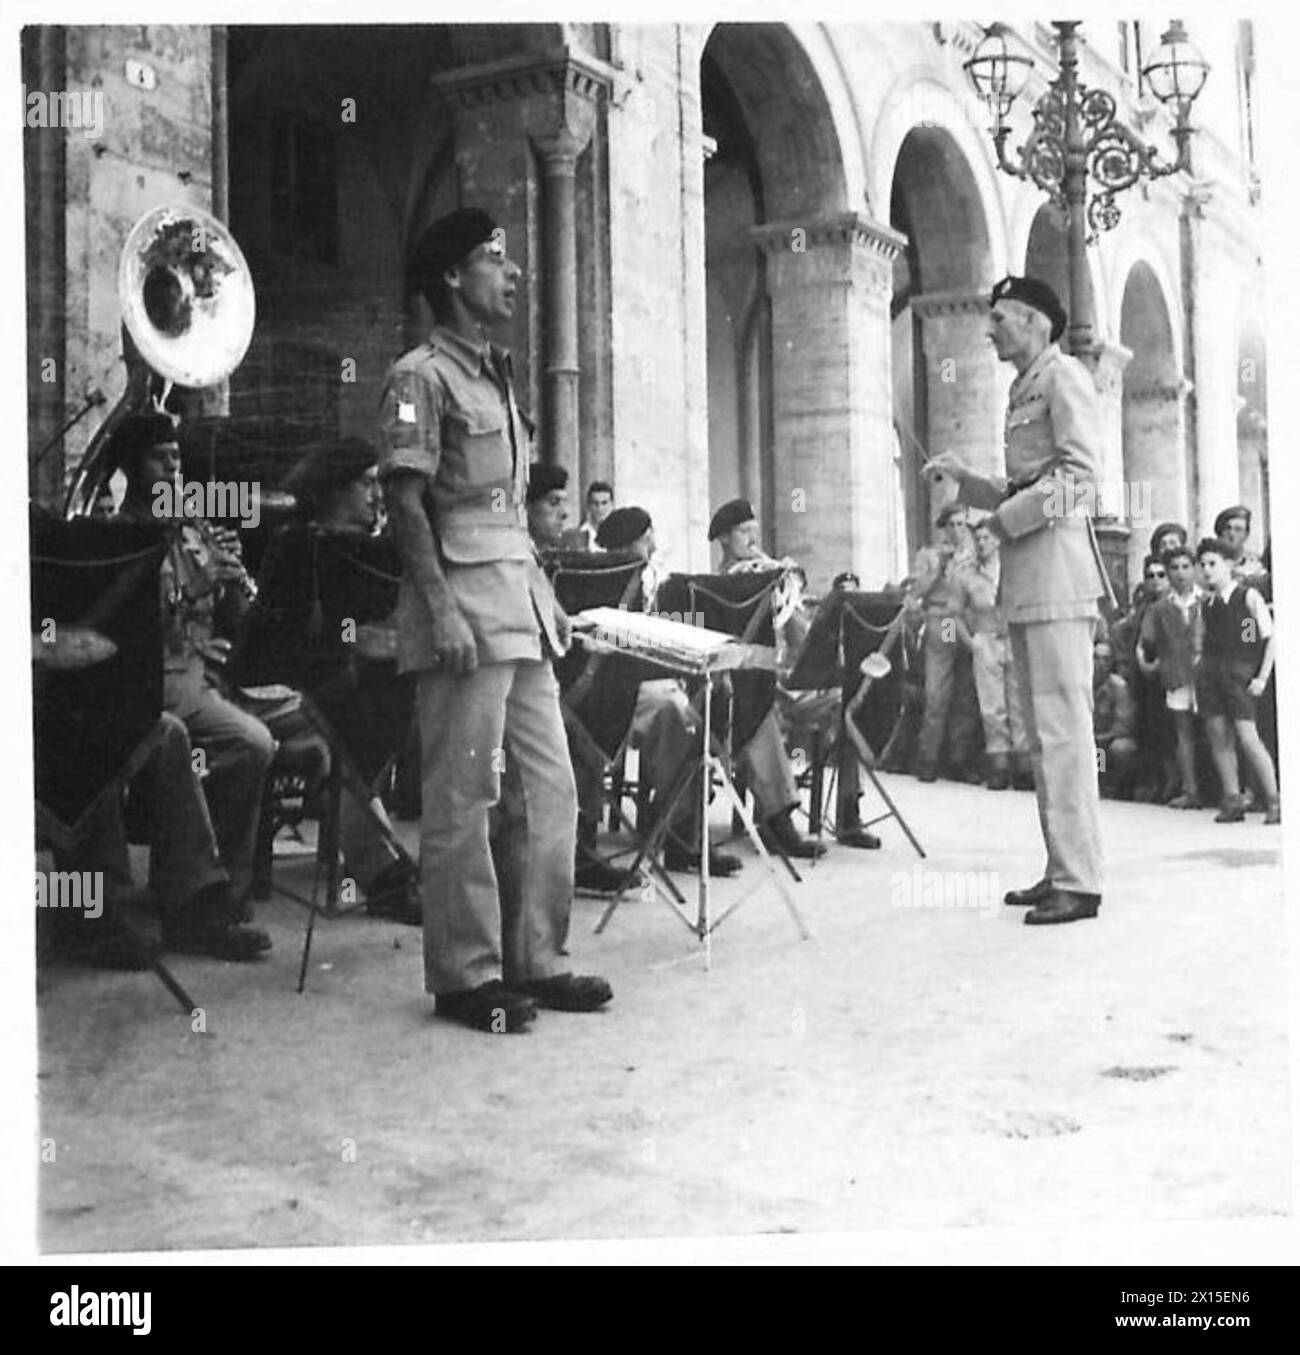 THE BRITISH ARMY IN NORTH AFRICA, SICILY, ITALY, THE BALKANS AND AUSTRIA 1942-1946 - Trumper Major Joseph Allen of 72 Wellworth Road, Goodmayes, Essex, puts down his trumpet and entertains the crowd with a song British Army Stock Photo